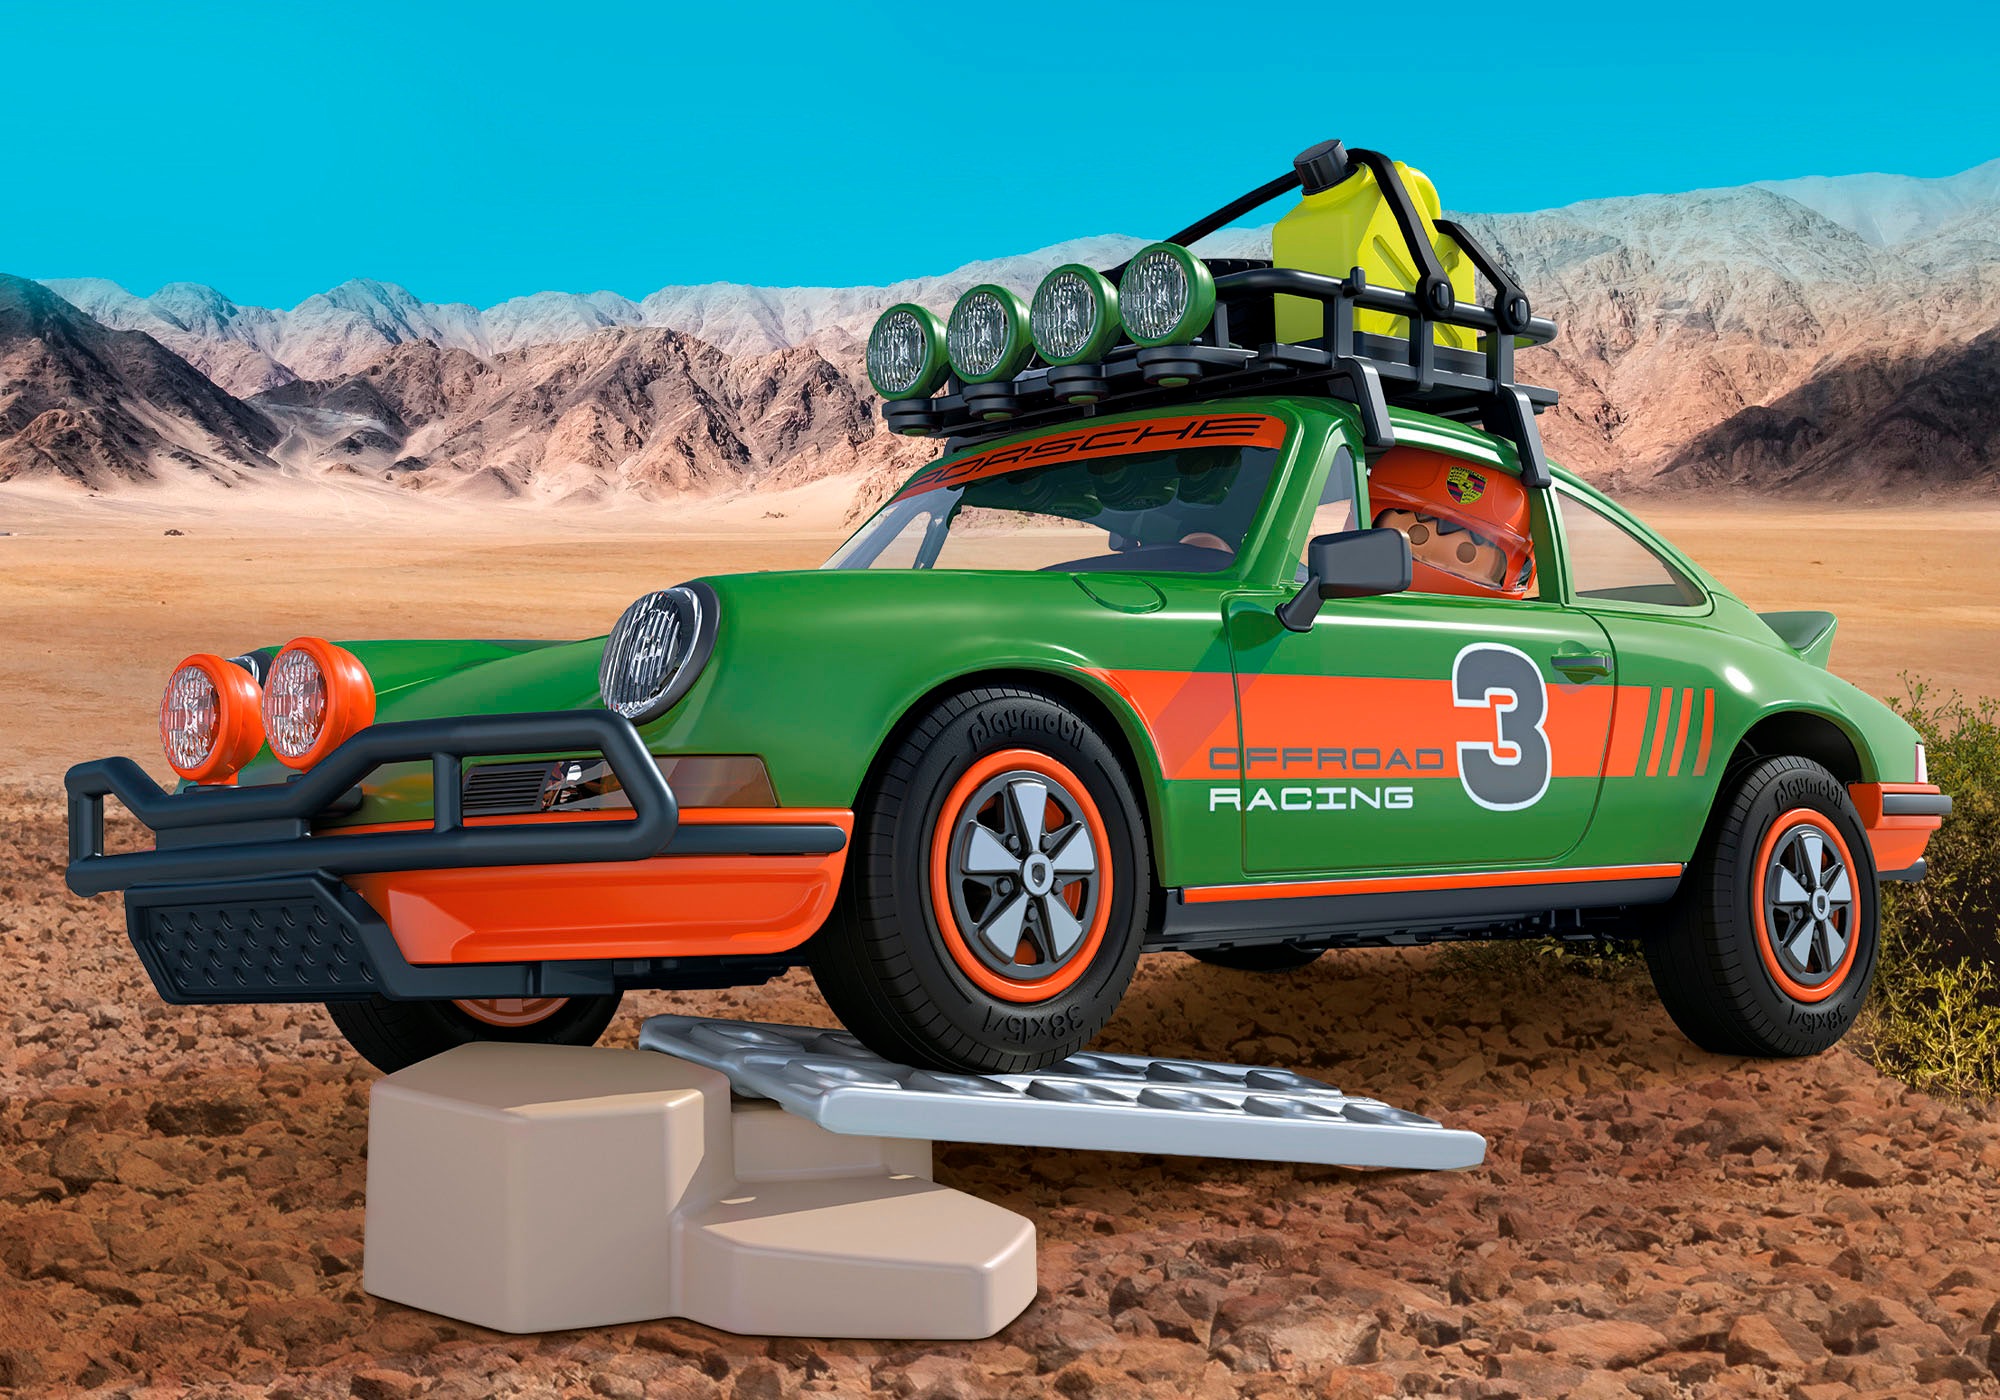 Playmobil® Konstruktions-Spielset »Porsche 911 Carrera RS 2.7 Offroad (71436), Cars«, (47 St.), Made in Germany